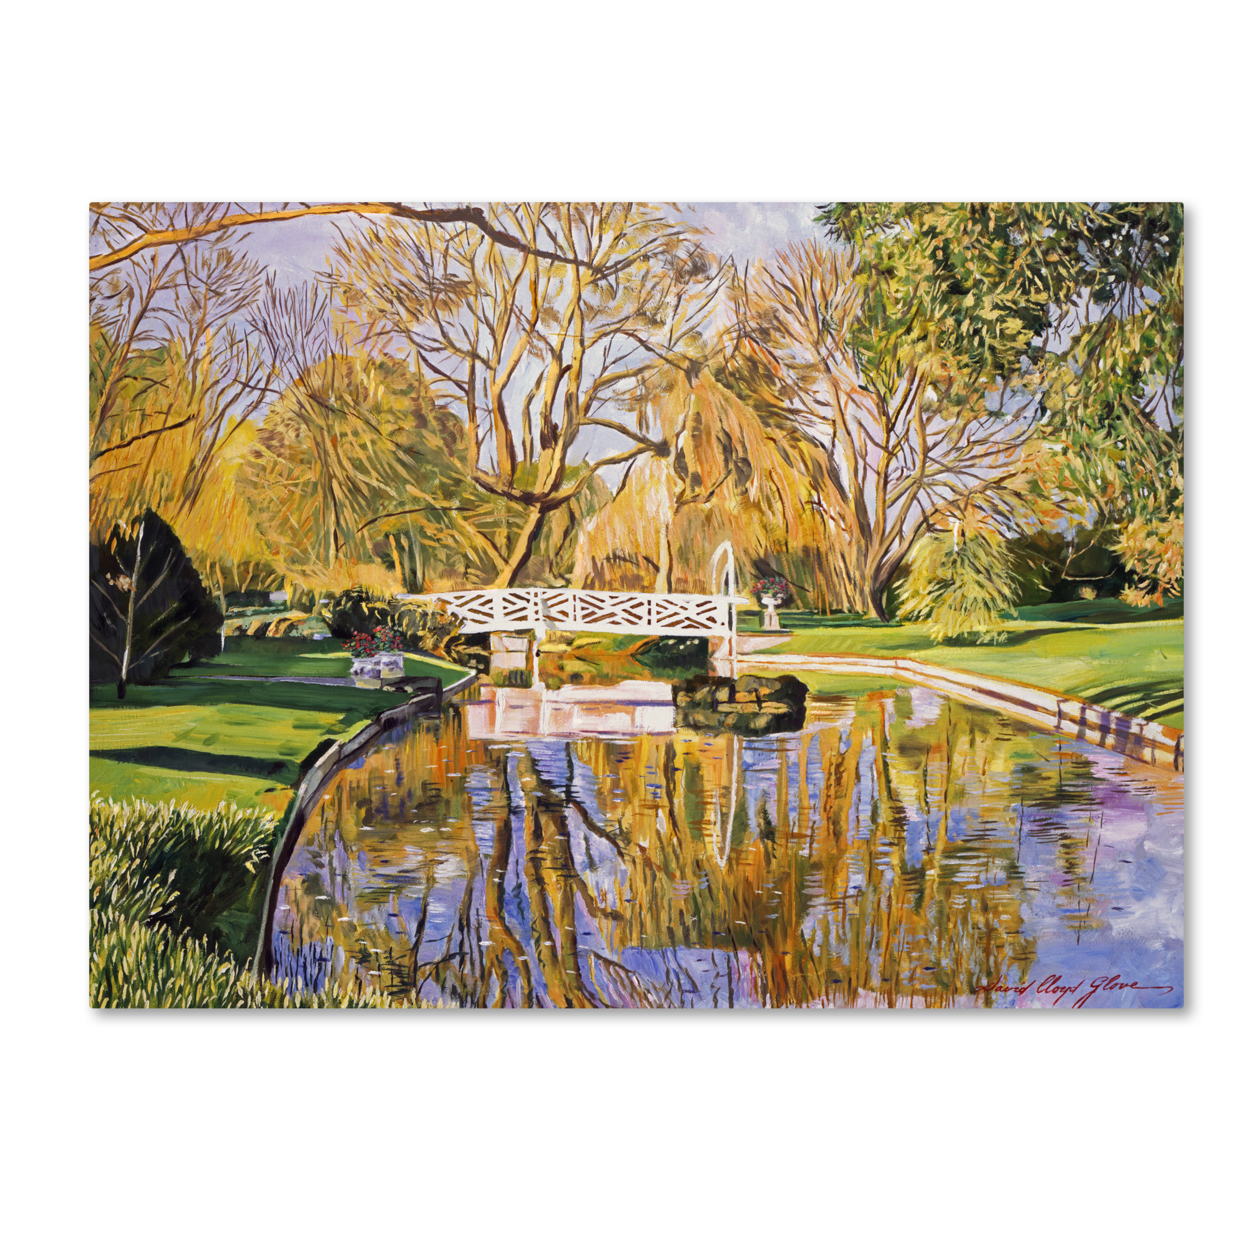 David Lloyd Glover 'Reflections Of The White Bridge' Canvas Wall Art 35 X 47 Inches